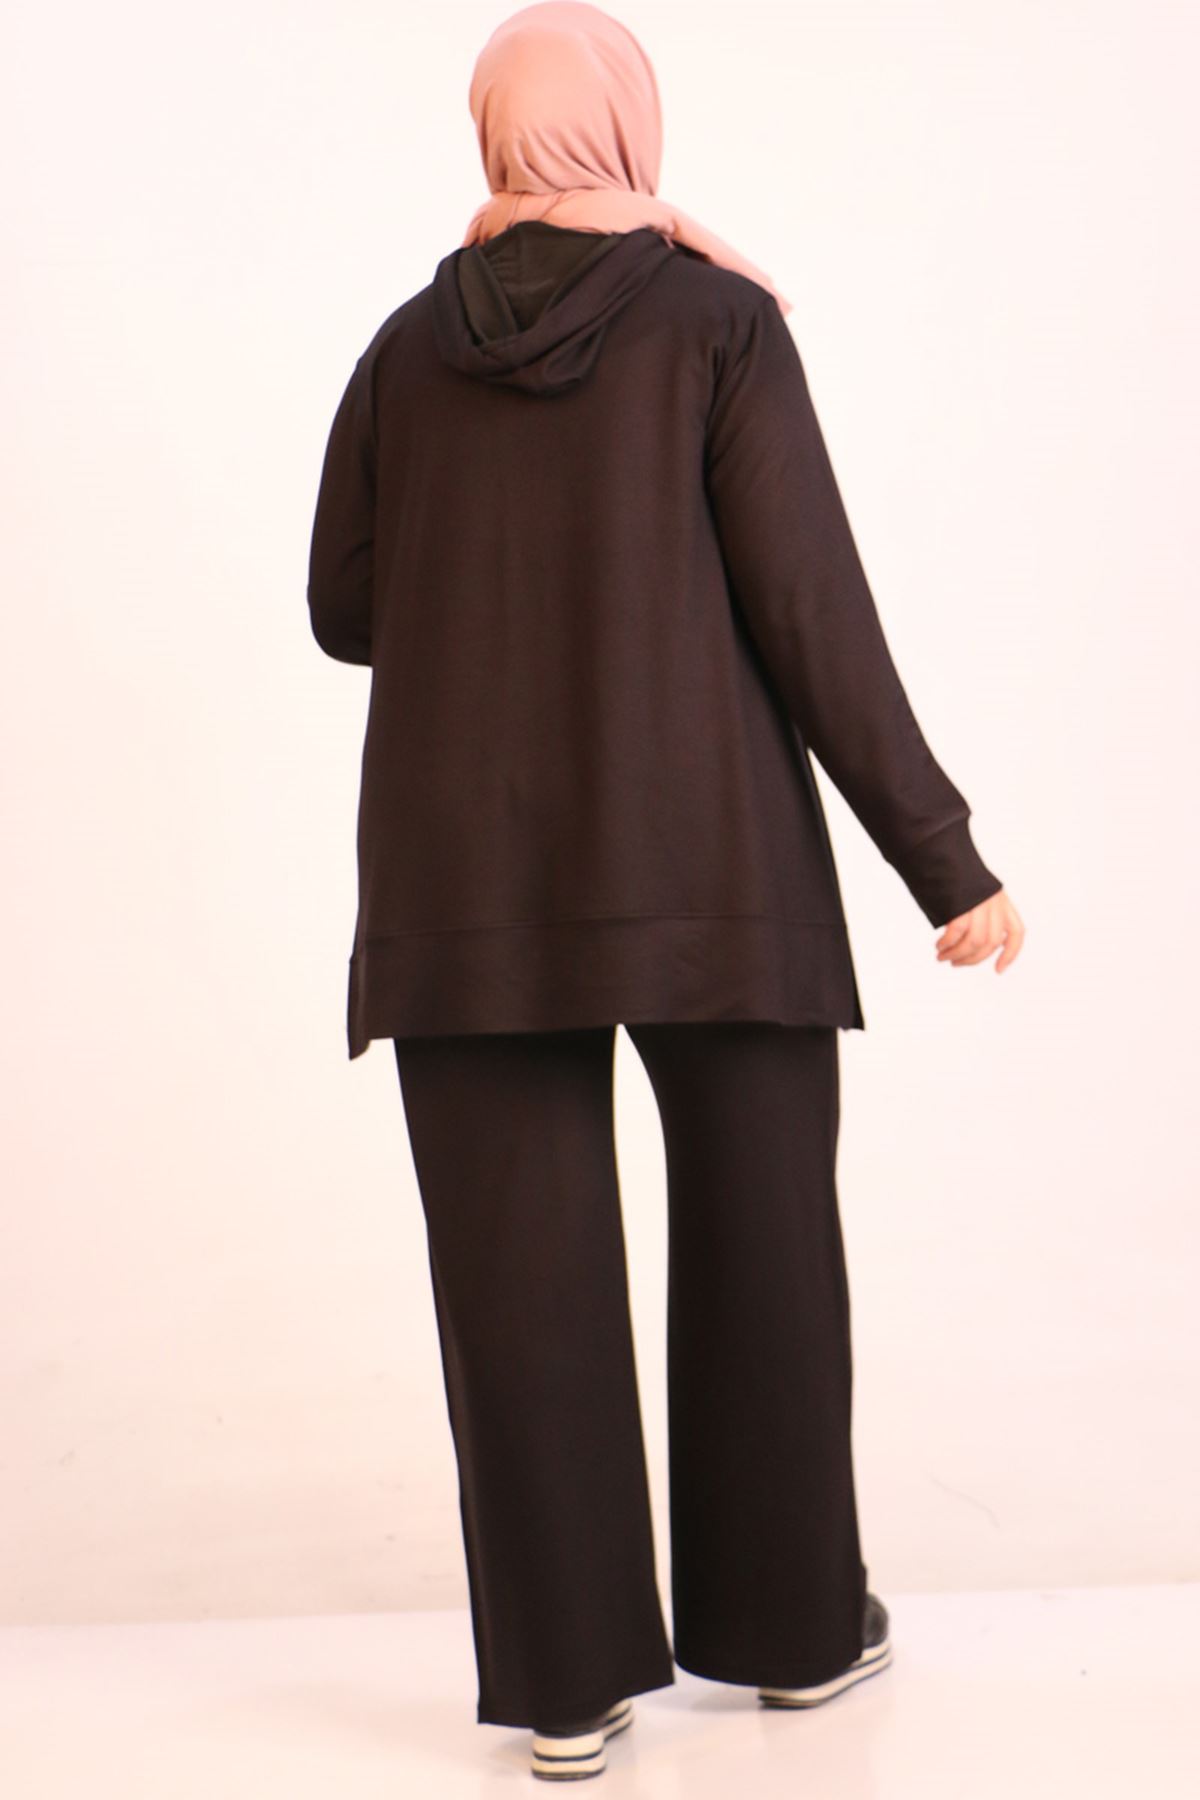 1989 Plus Size Hooded Two Thread Trousers Suit -Black